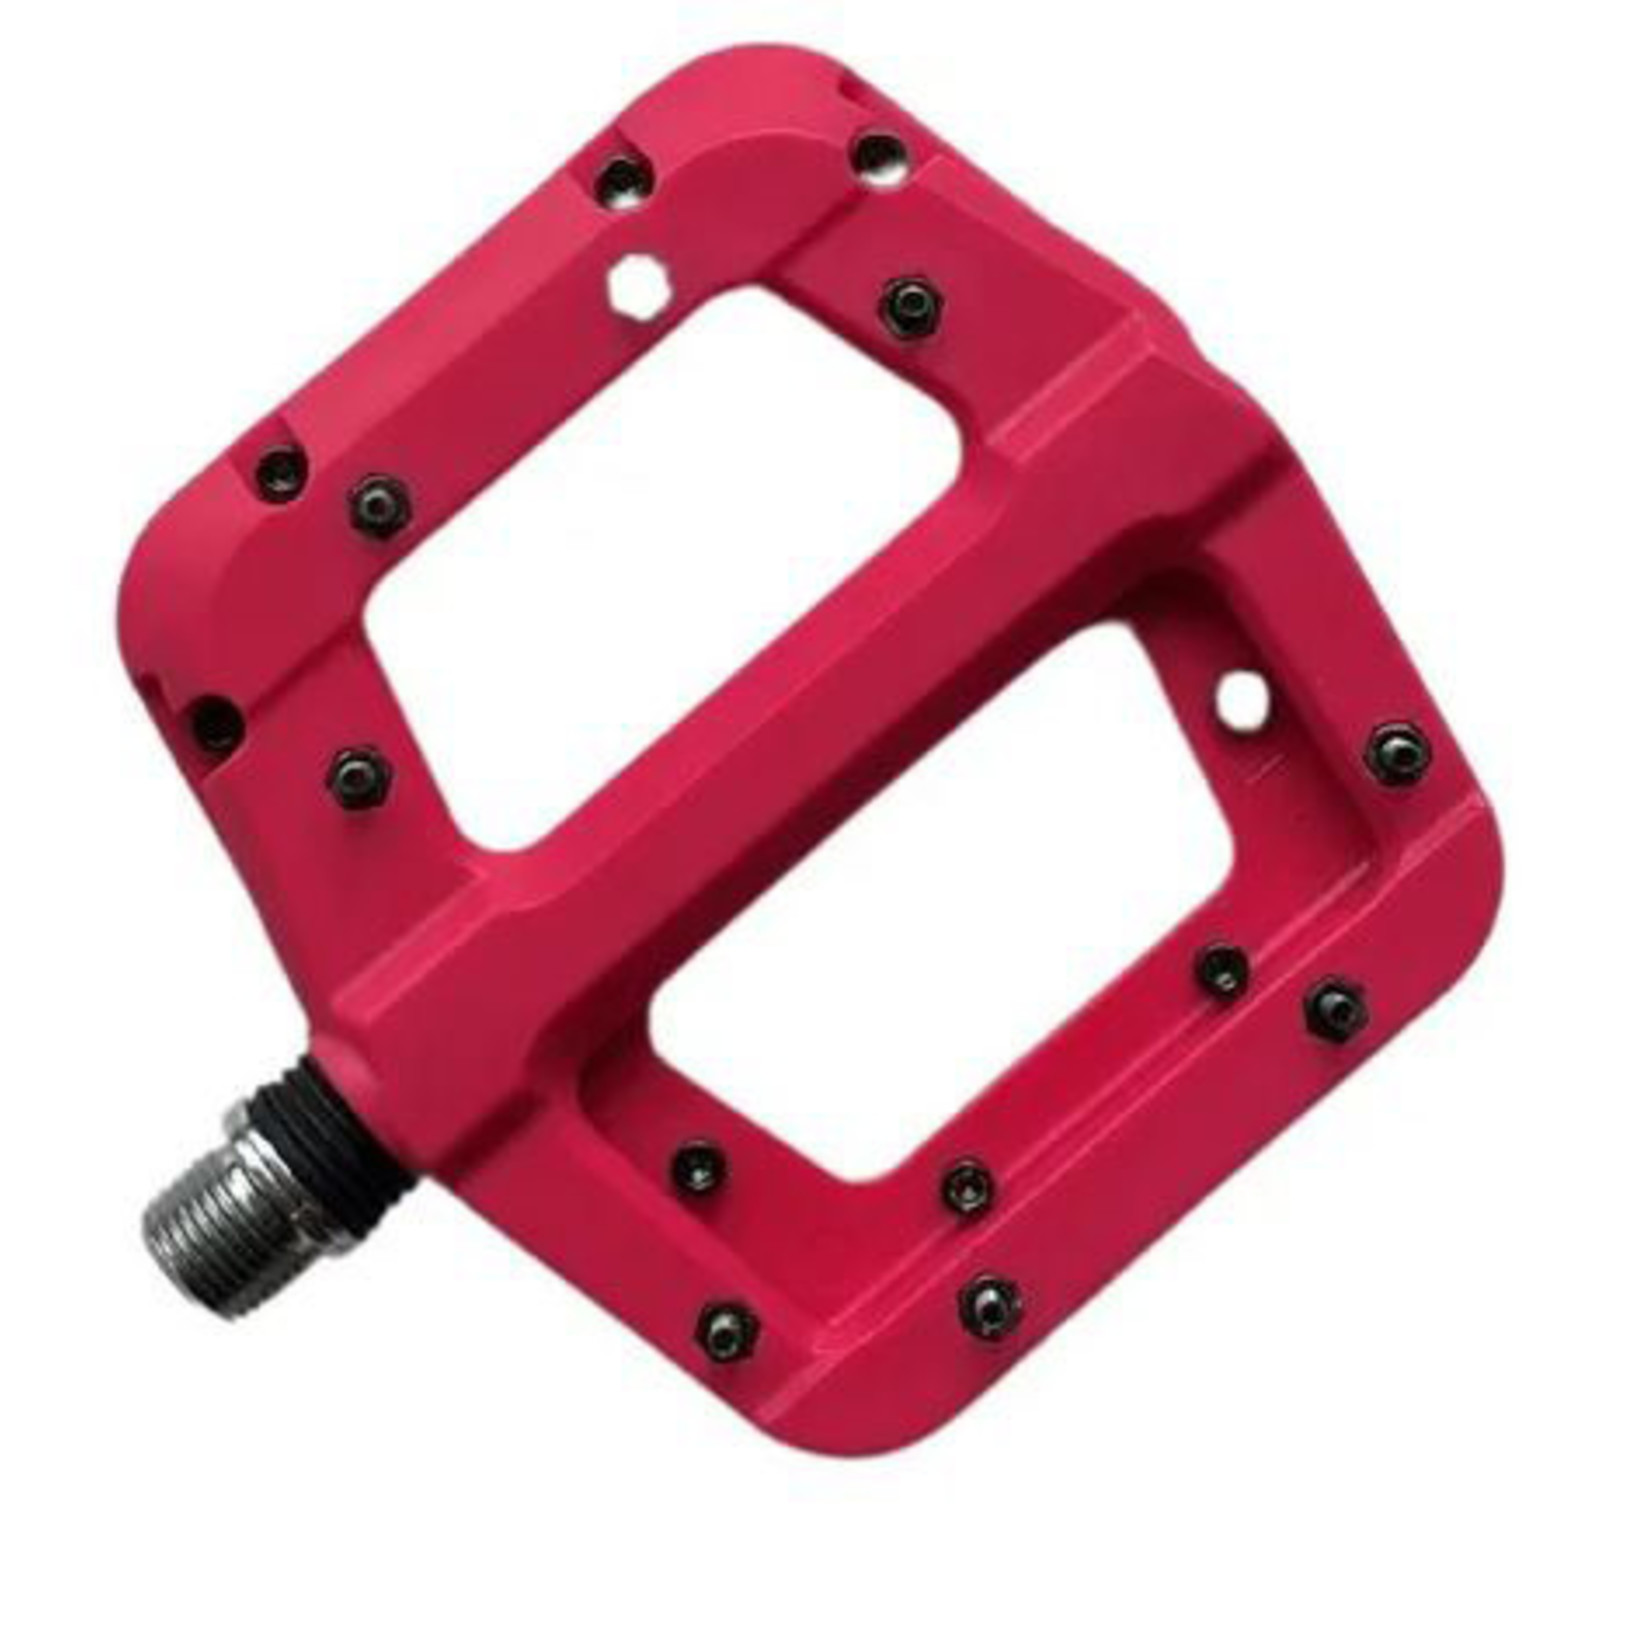 Bicycle Peddler Bare Pedals Nylon Sealed Bearing Bike Pedals - Red